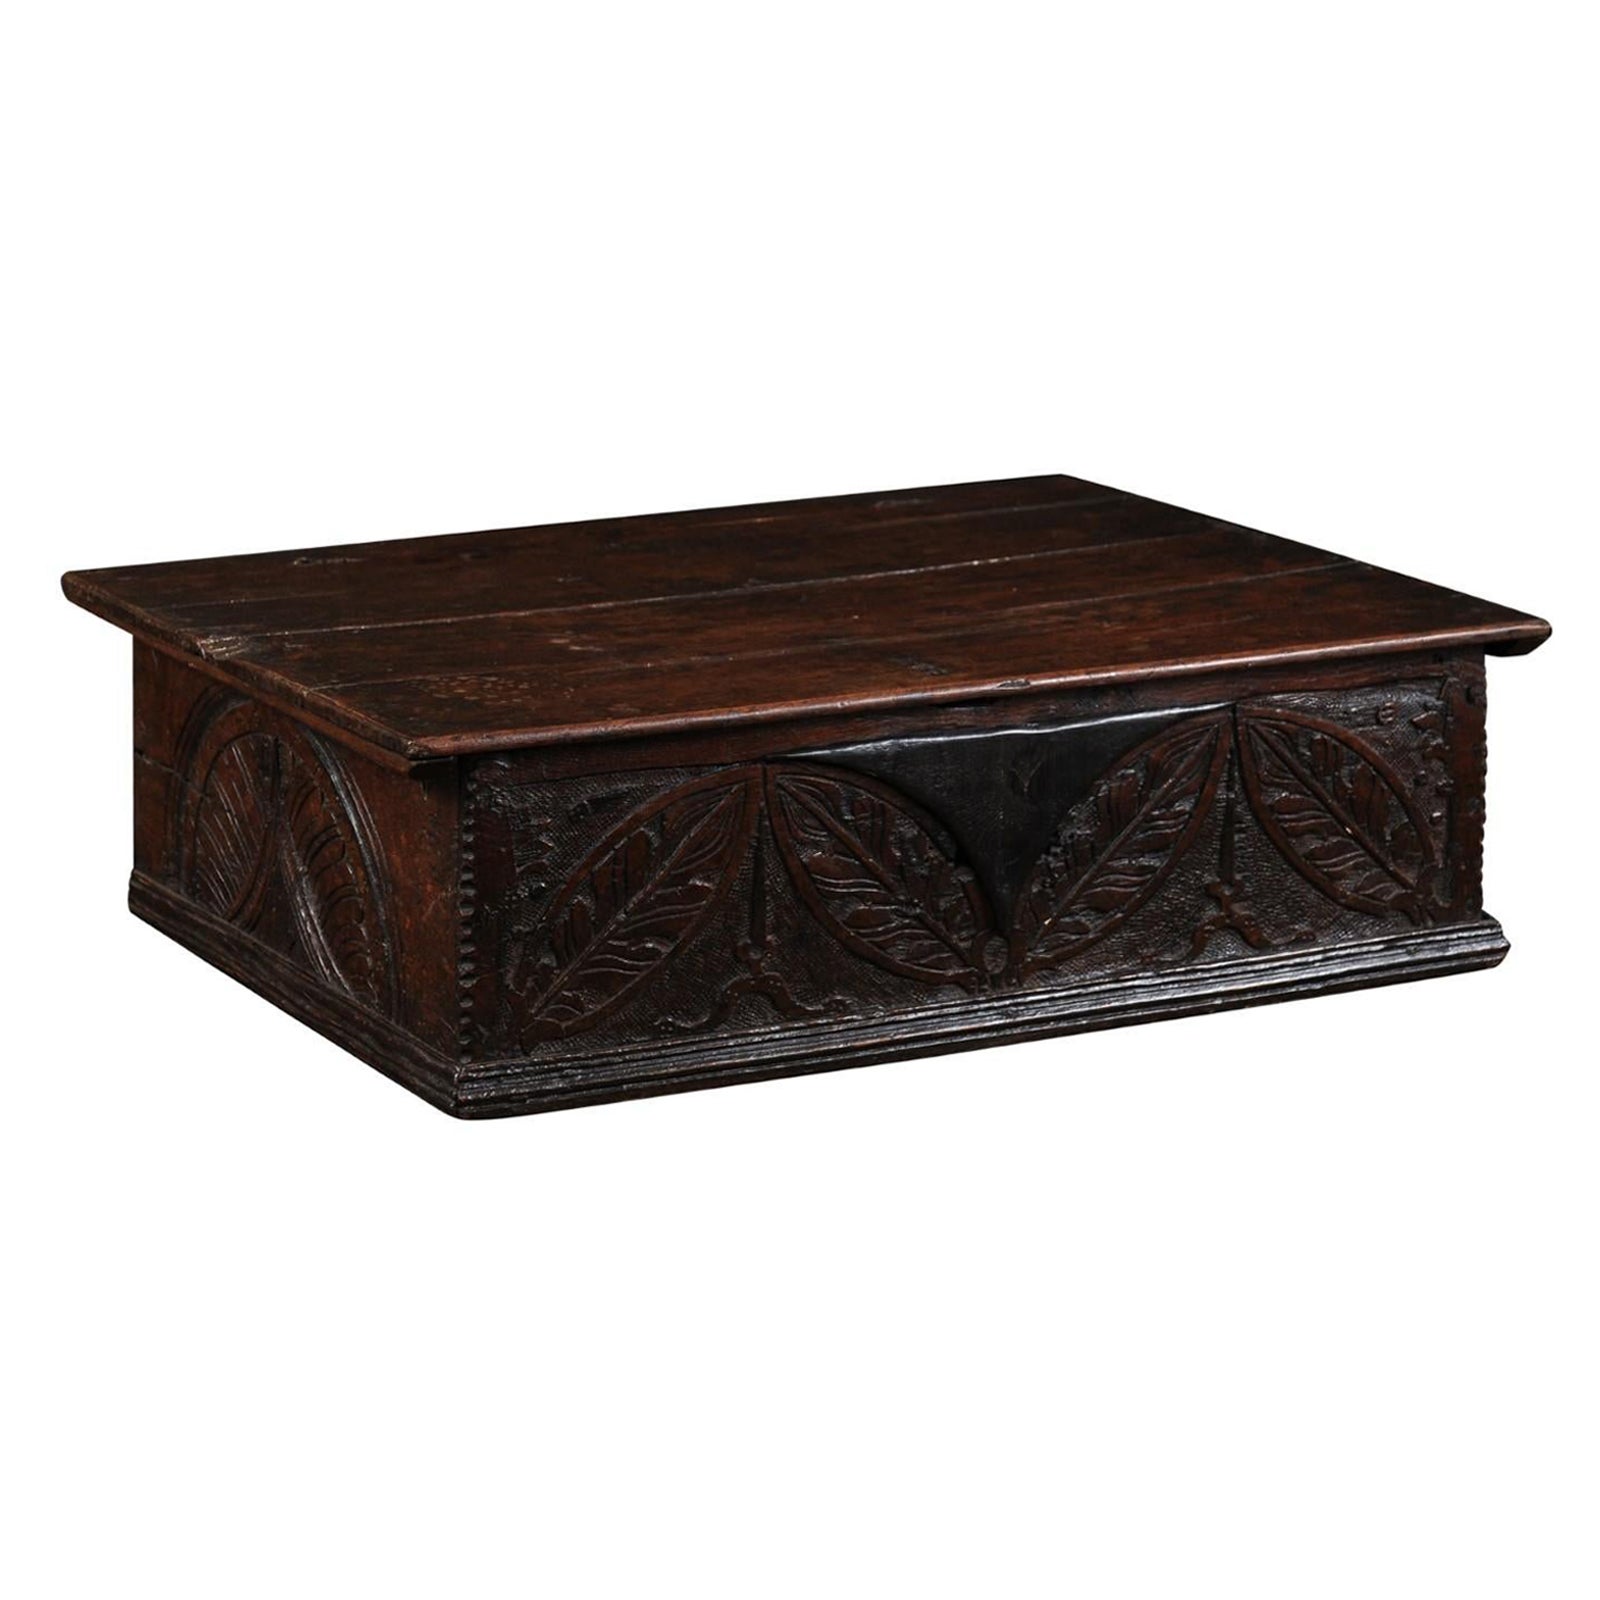 18th Century Oak Bible Box with Foliate Carving